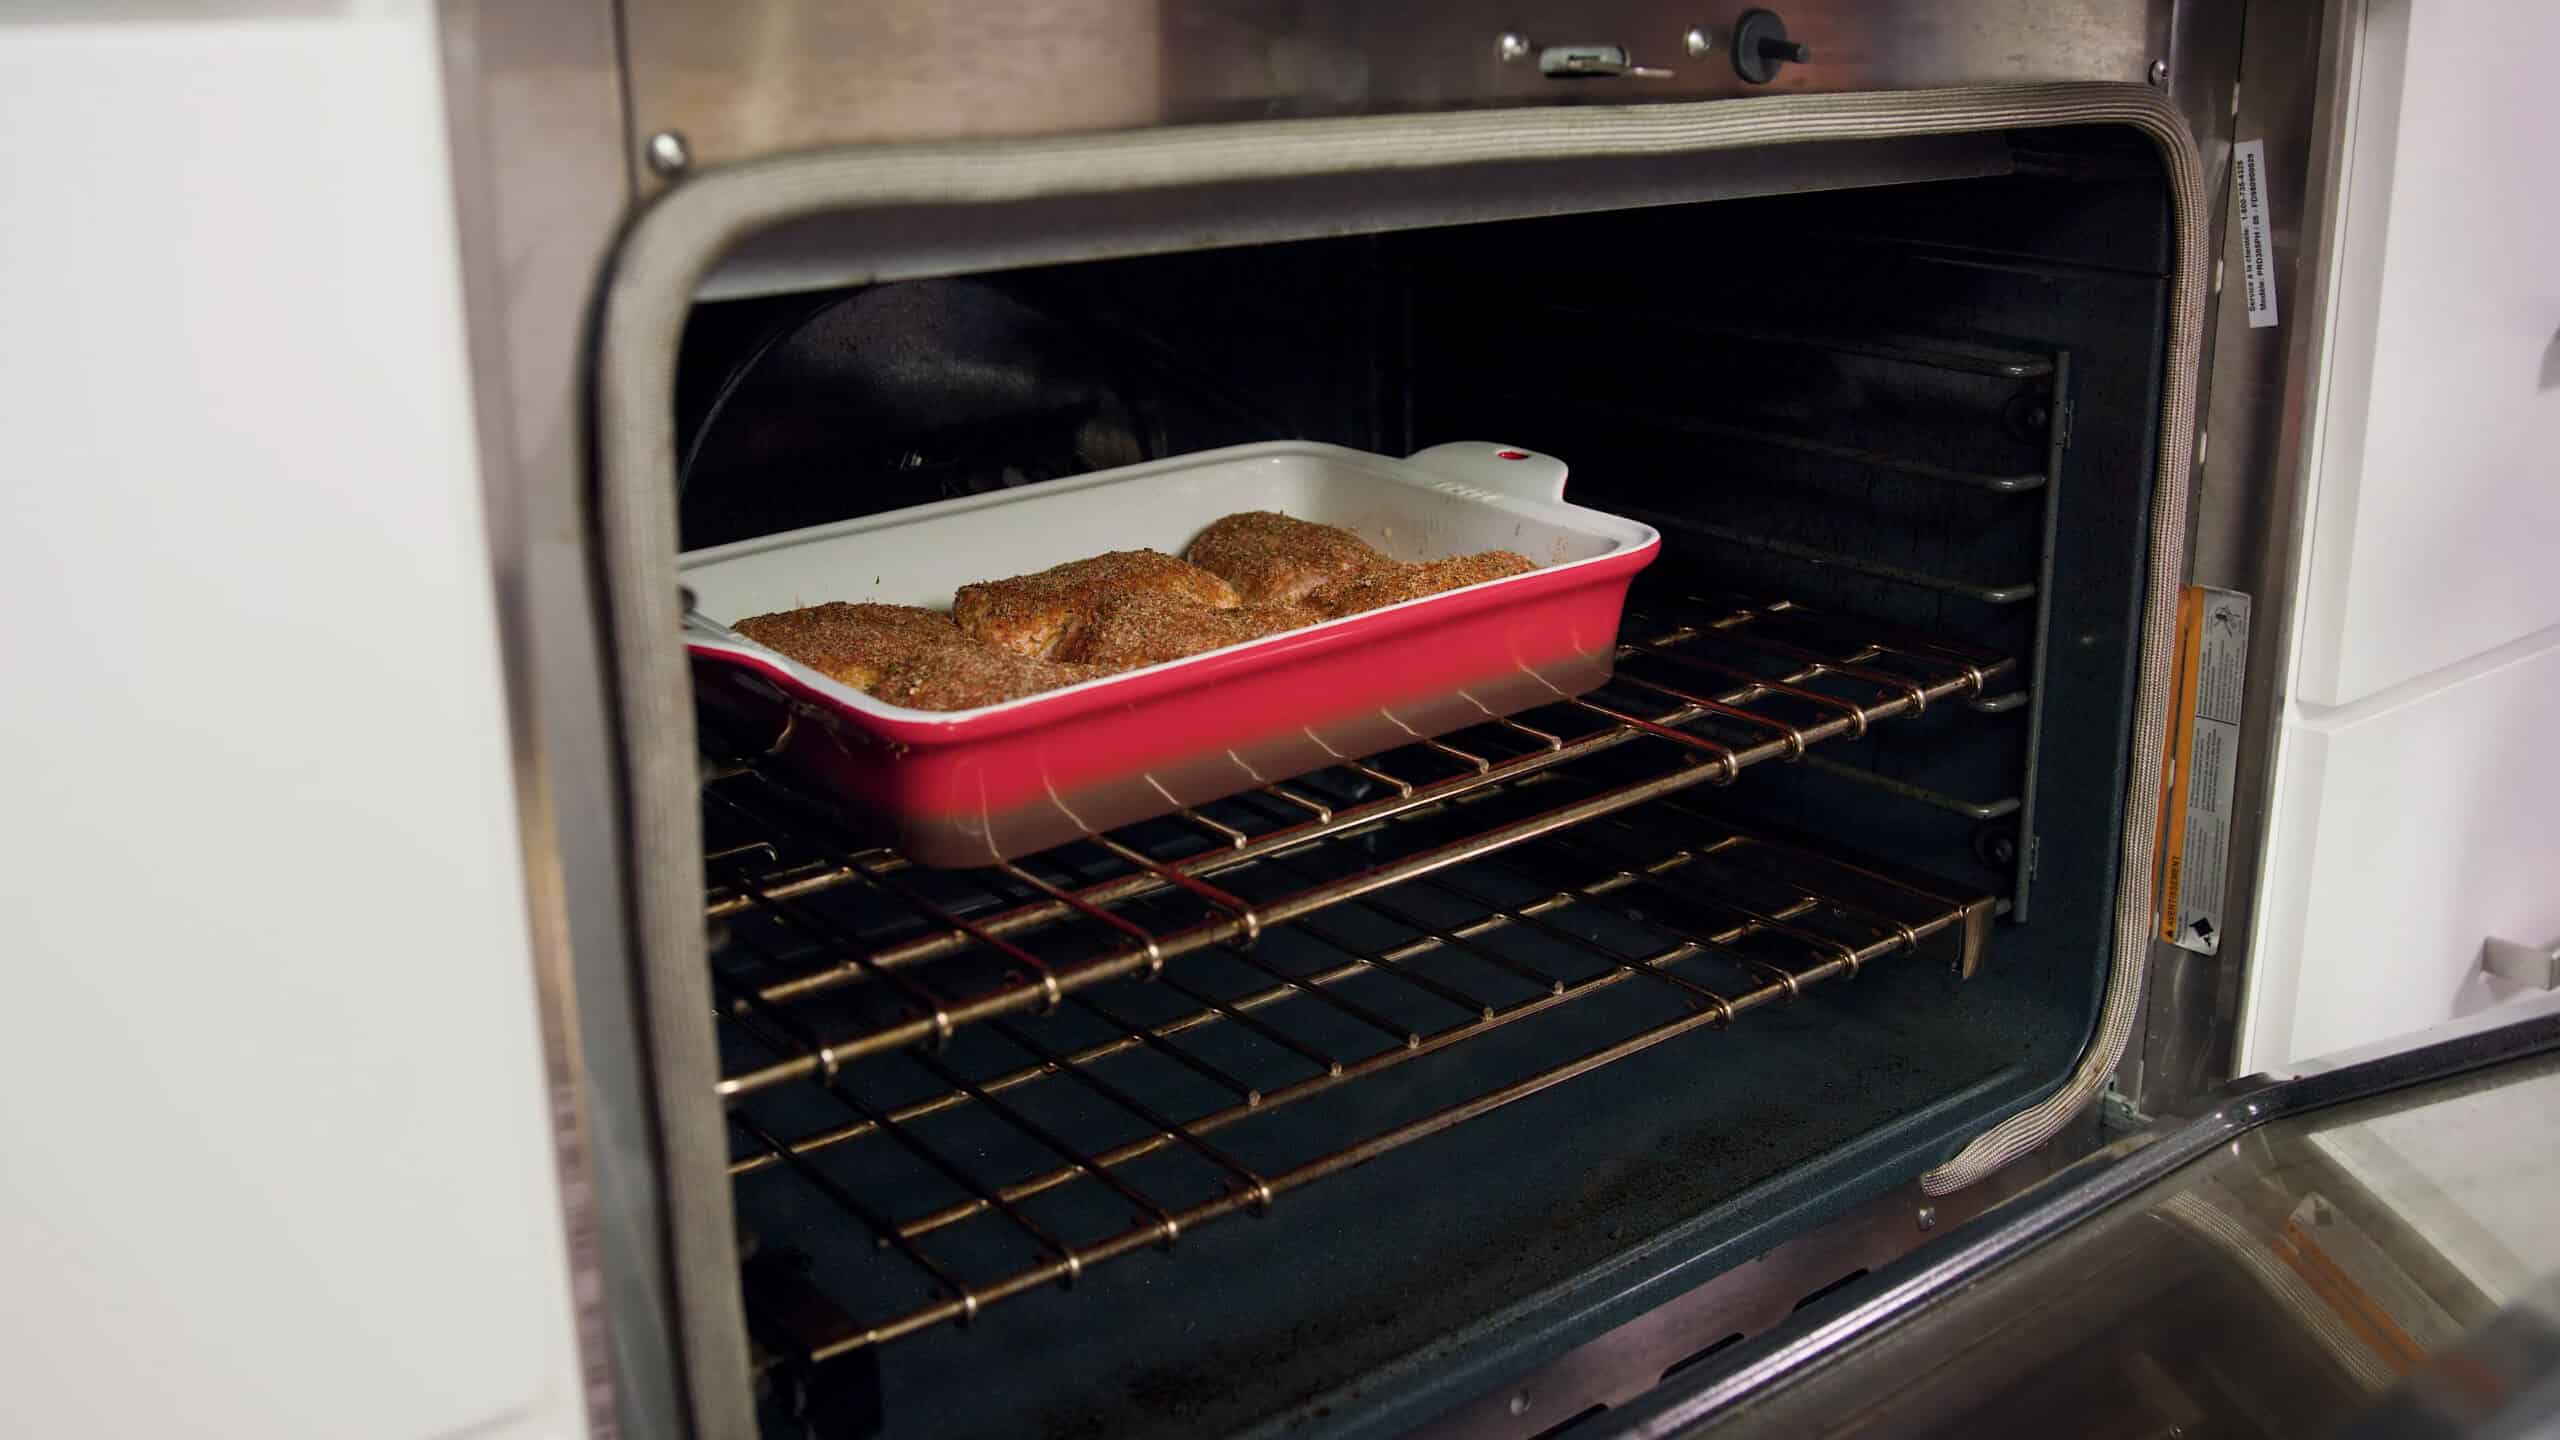 Angled view of open oven with an enamel coated cast iron casserole dish filled with chicken thighs placed on a metal rack in the middle of the oven.